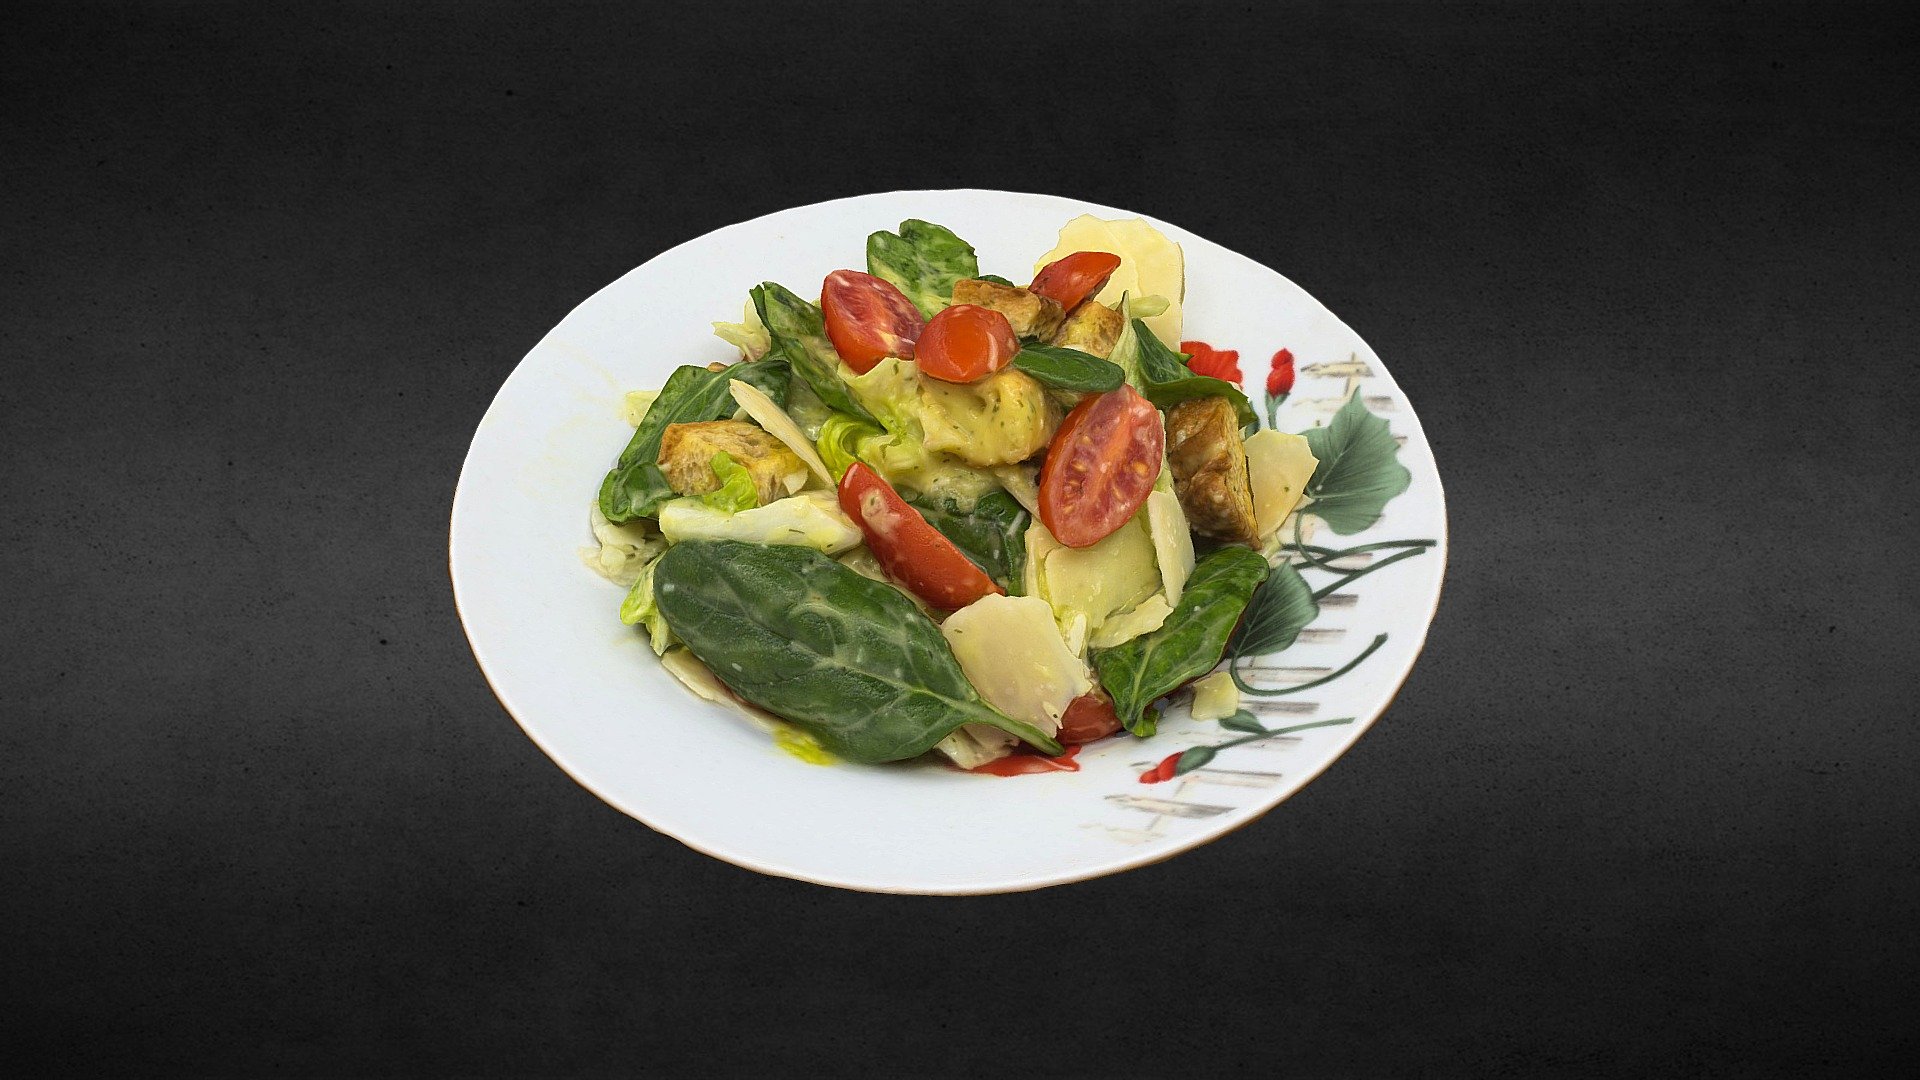 A 3d scanning test with photogrammetry on a salad 3d model